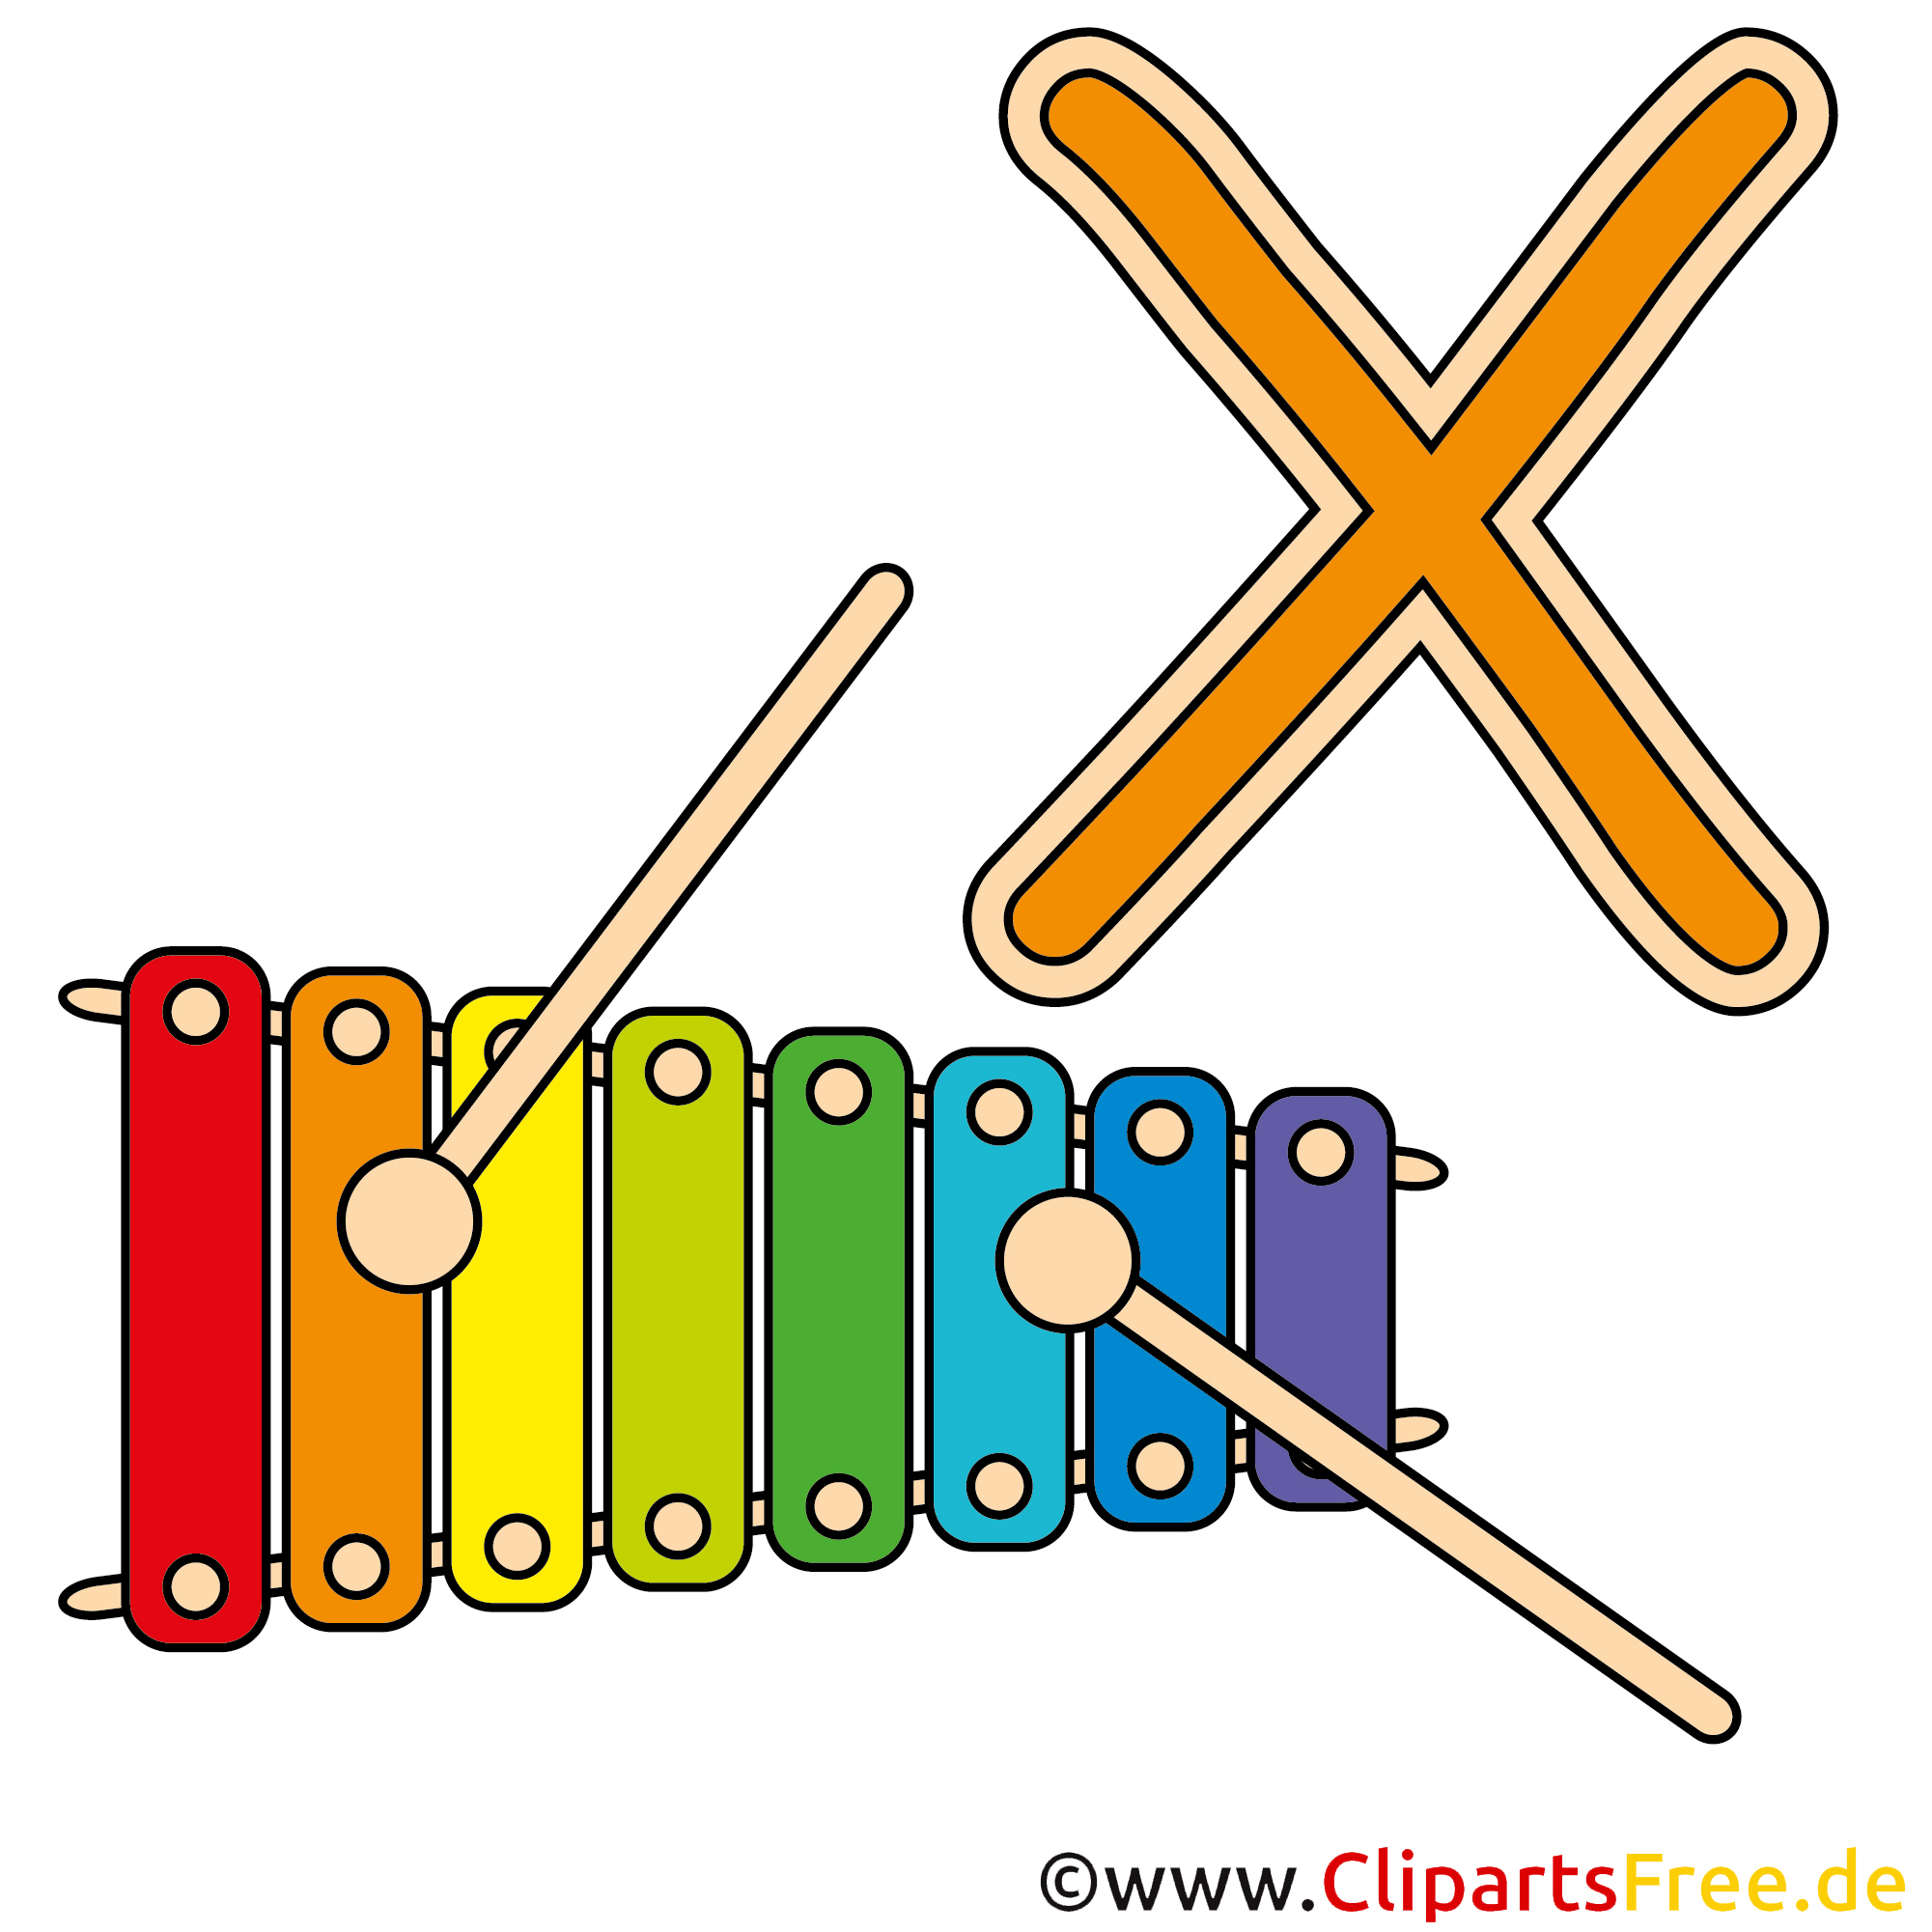 xylophone clipart images - photo #18